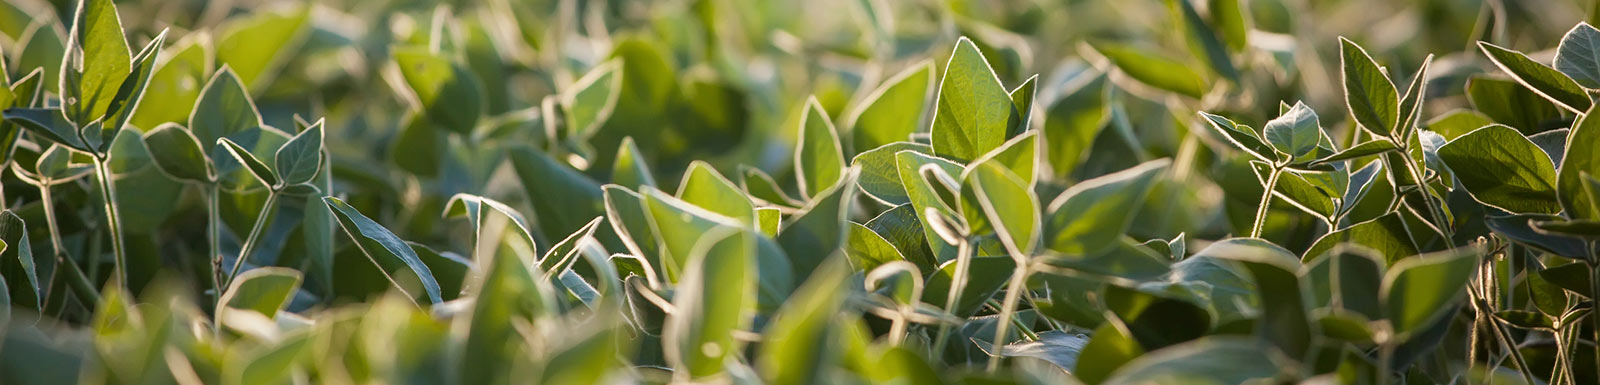 Close up of soybean plants